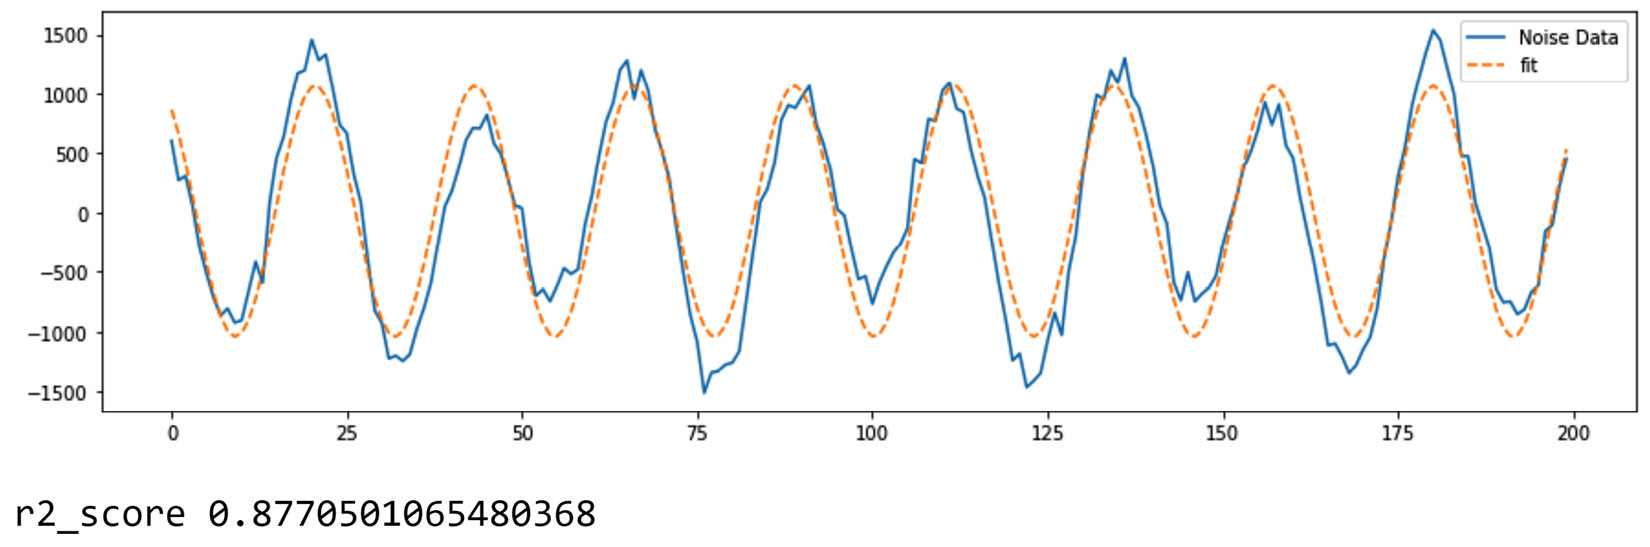 Figure 13.22 – The output of fitting the Fourier function to Noise_data.csv
